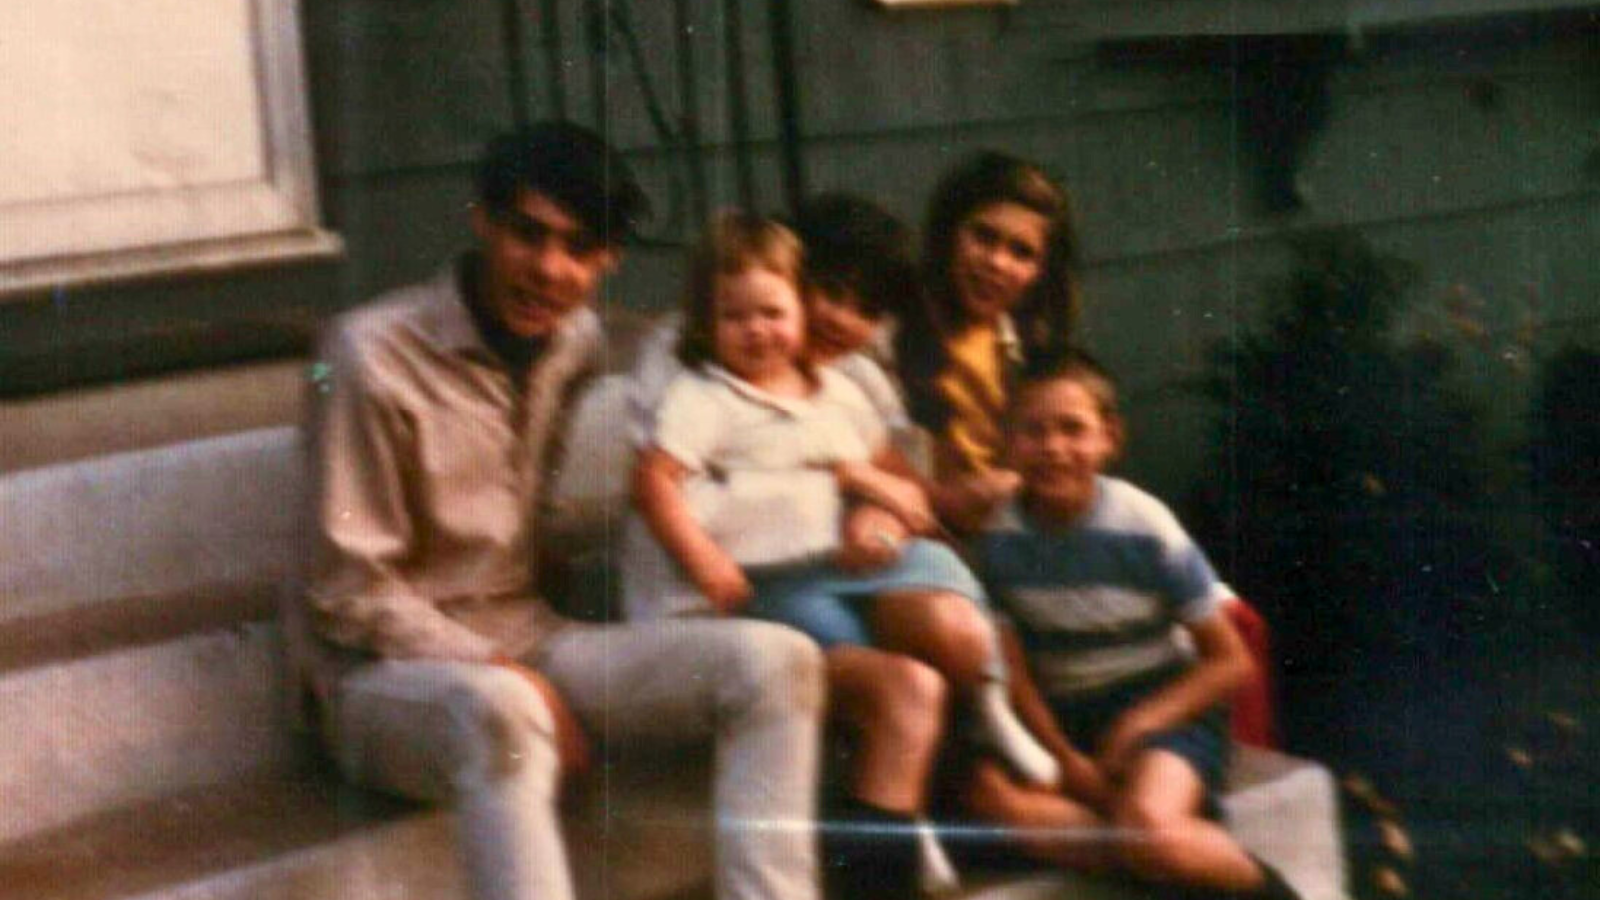 Me with my brothers and sister. It was the Spring or Summer of 1966 when I was about 15 months old. We are on the front steps of our house.